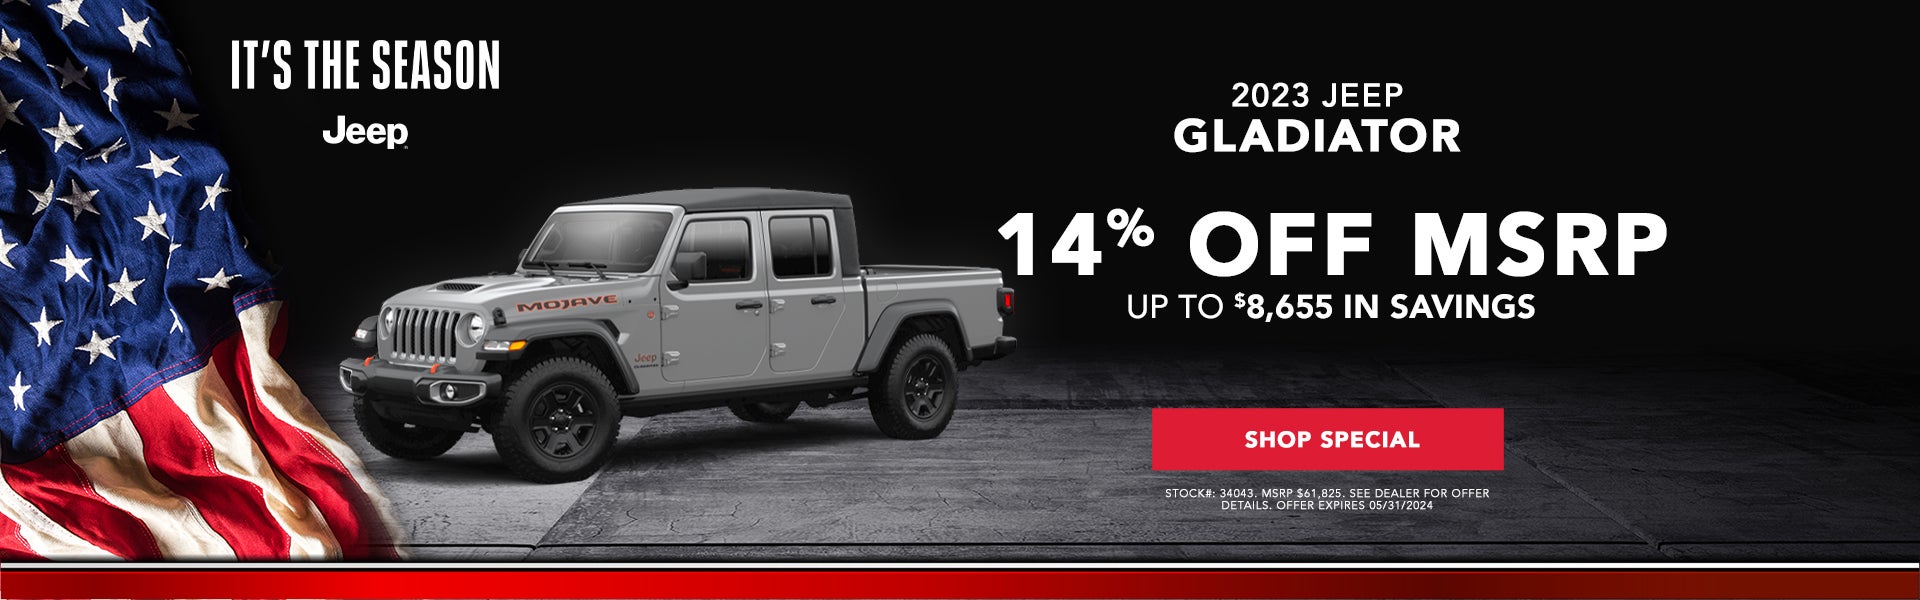 14% Off MSRP Up To $8,655 in Savings